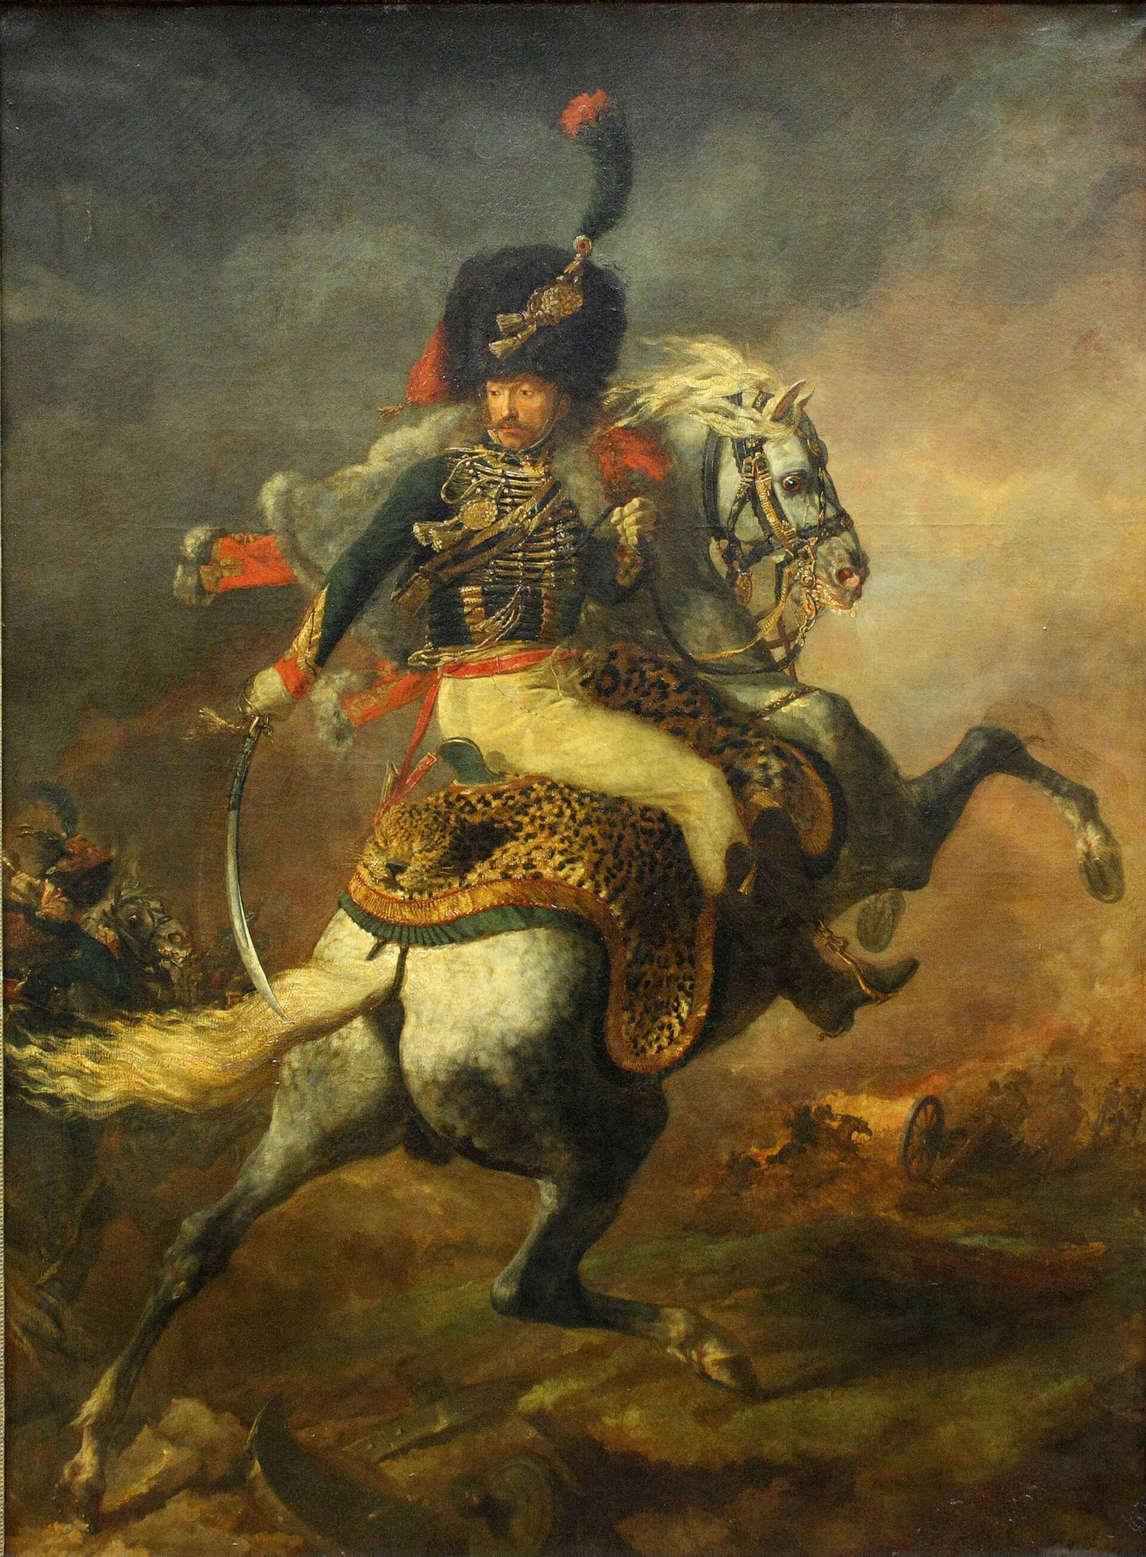 Art Canada Institute, Paul Kane,  An Officer of the Chasseurs Commanding a Charge, by Théodore Géricault, 1812